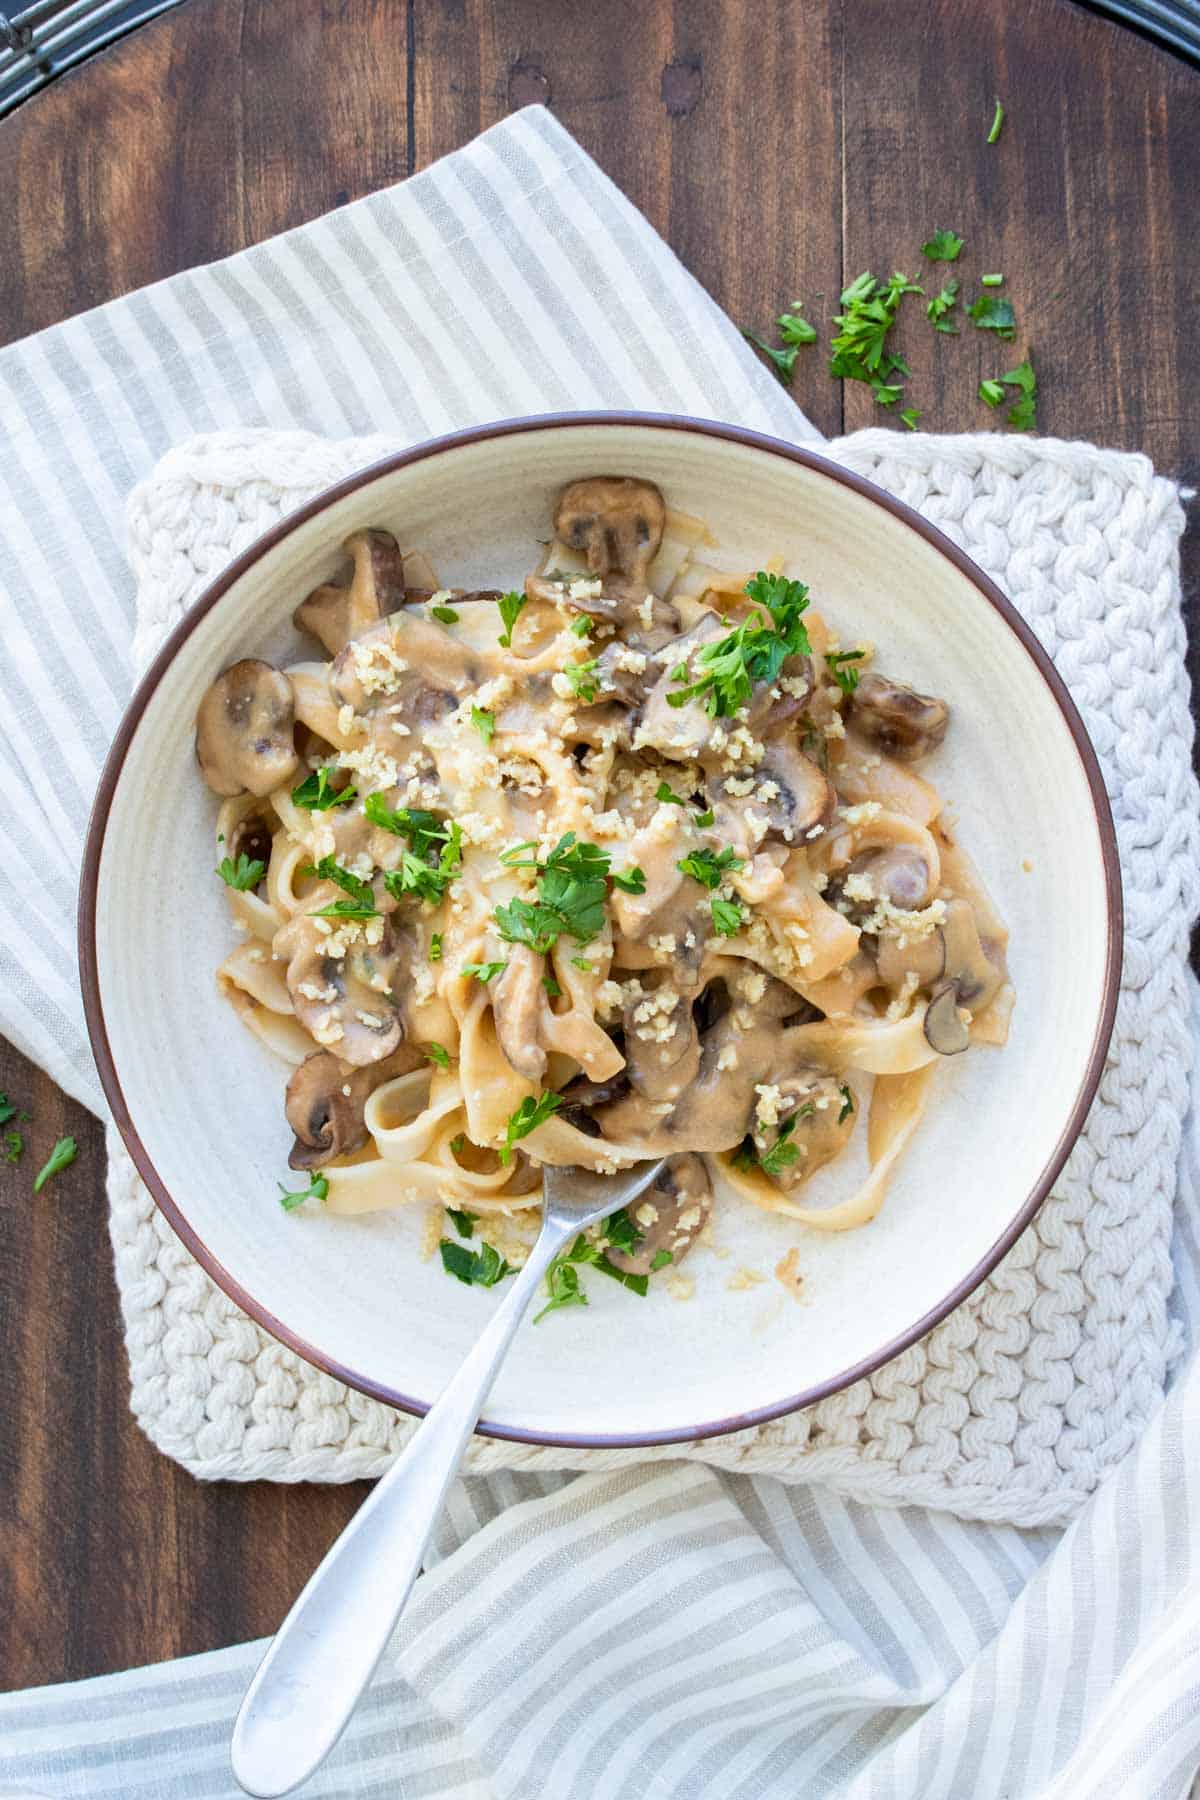 White bowl filled with fettuccini noodles and mushroom stroganoff sauce